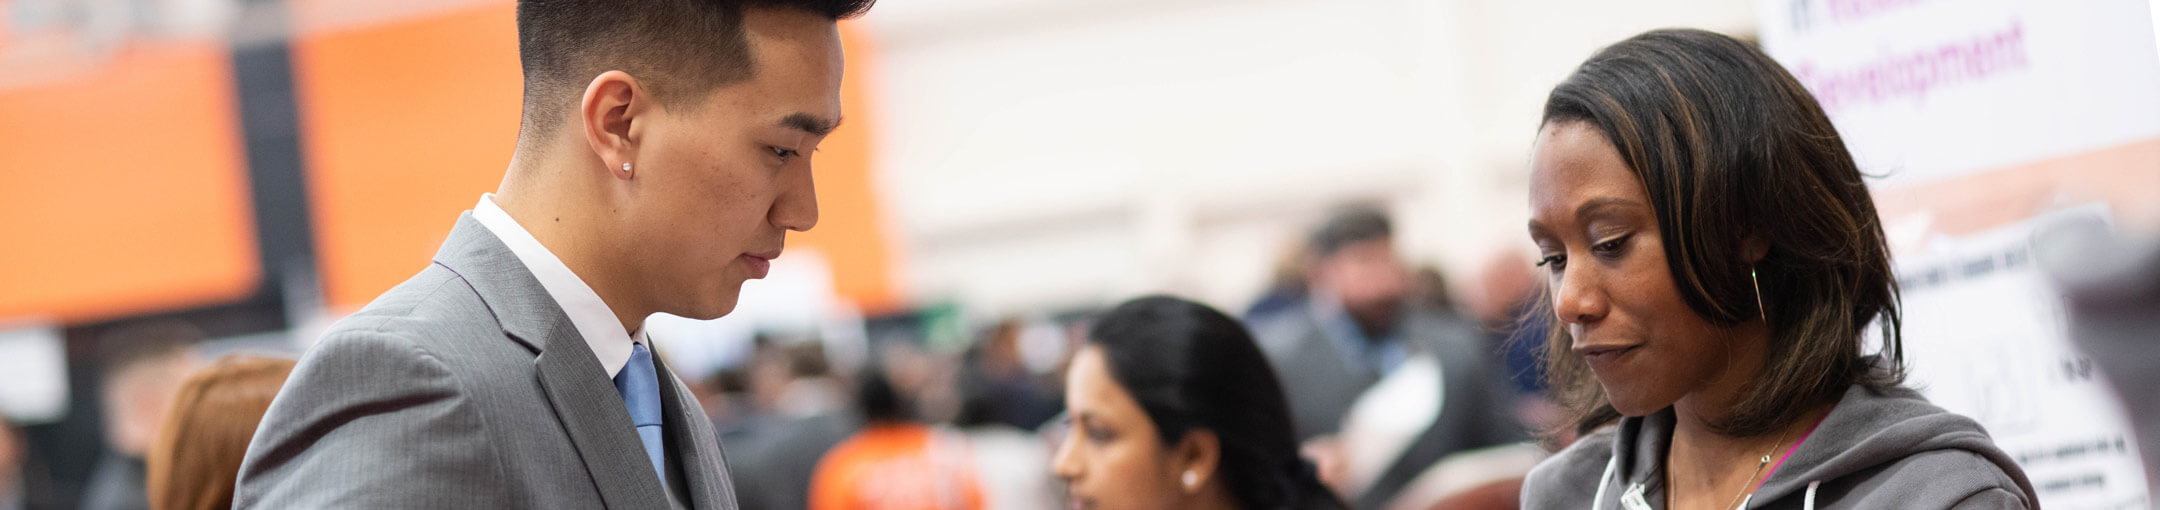 An RIT student talking to a representative from a company at a career fair.